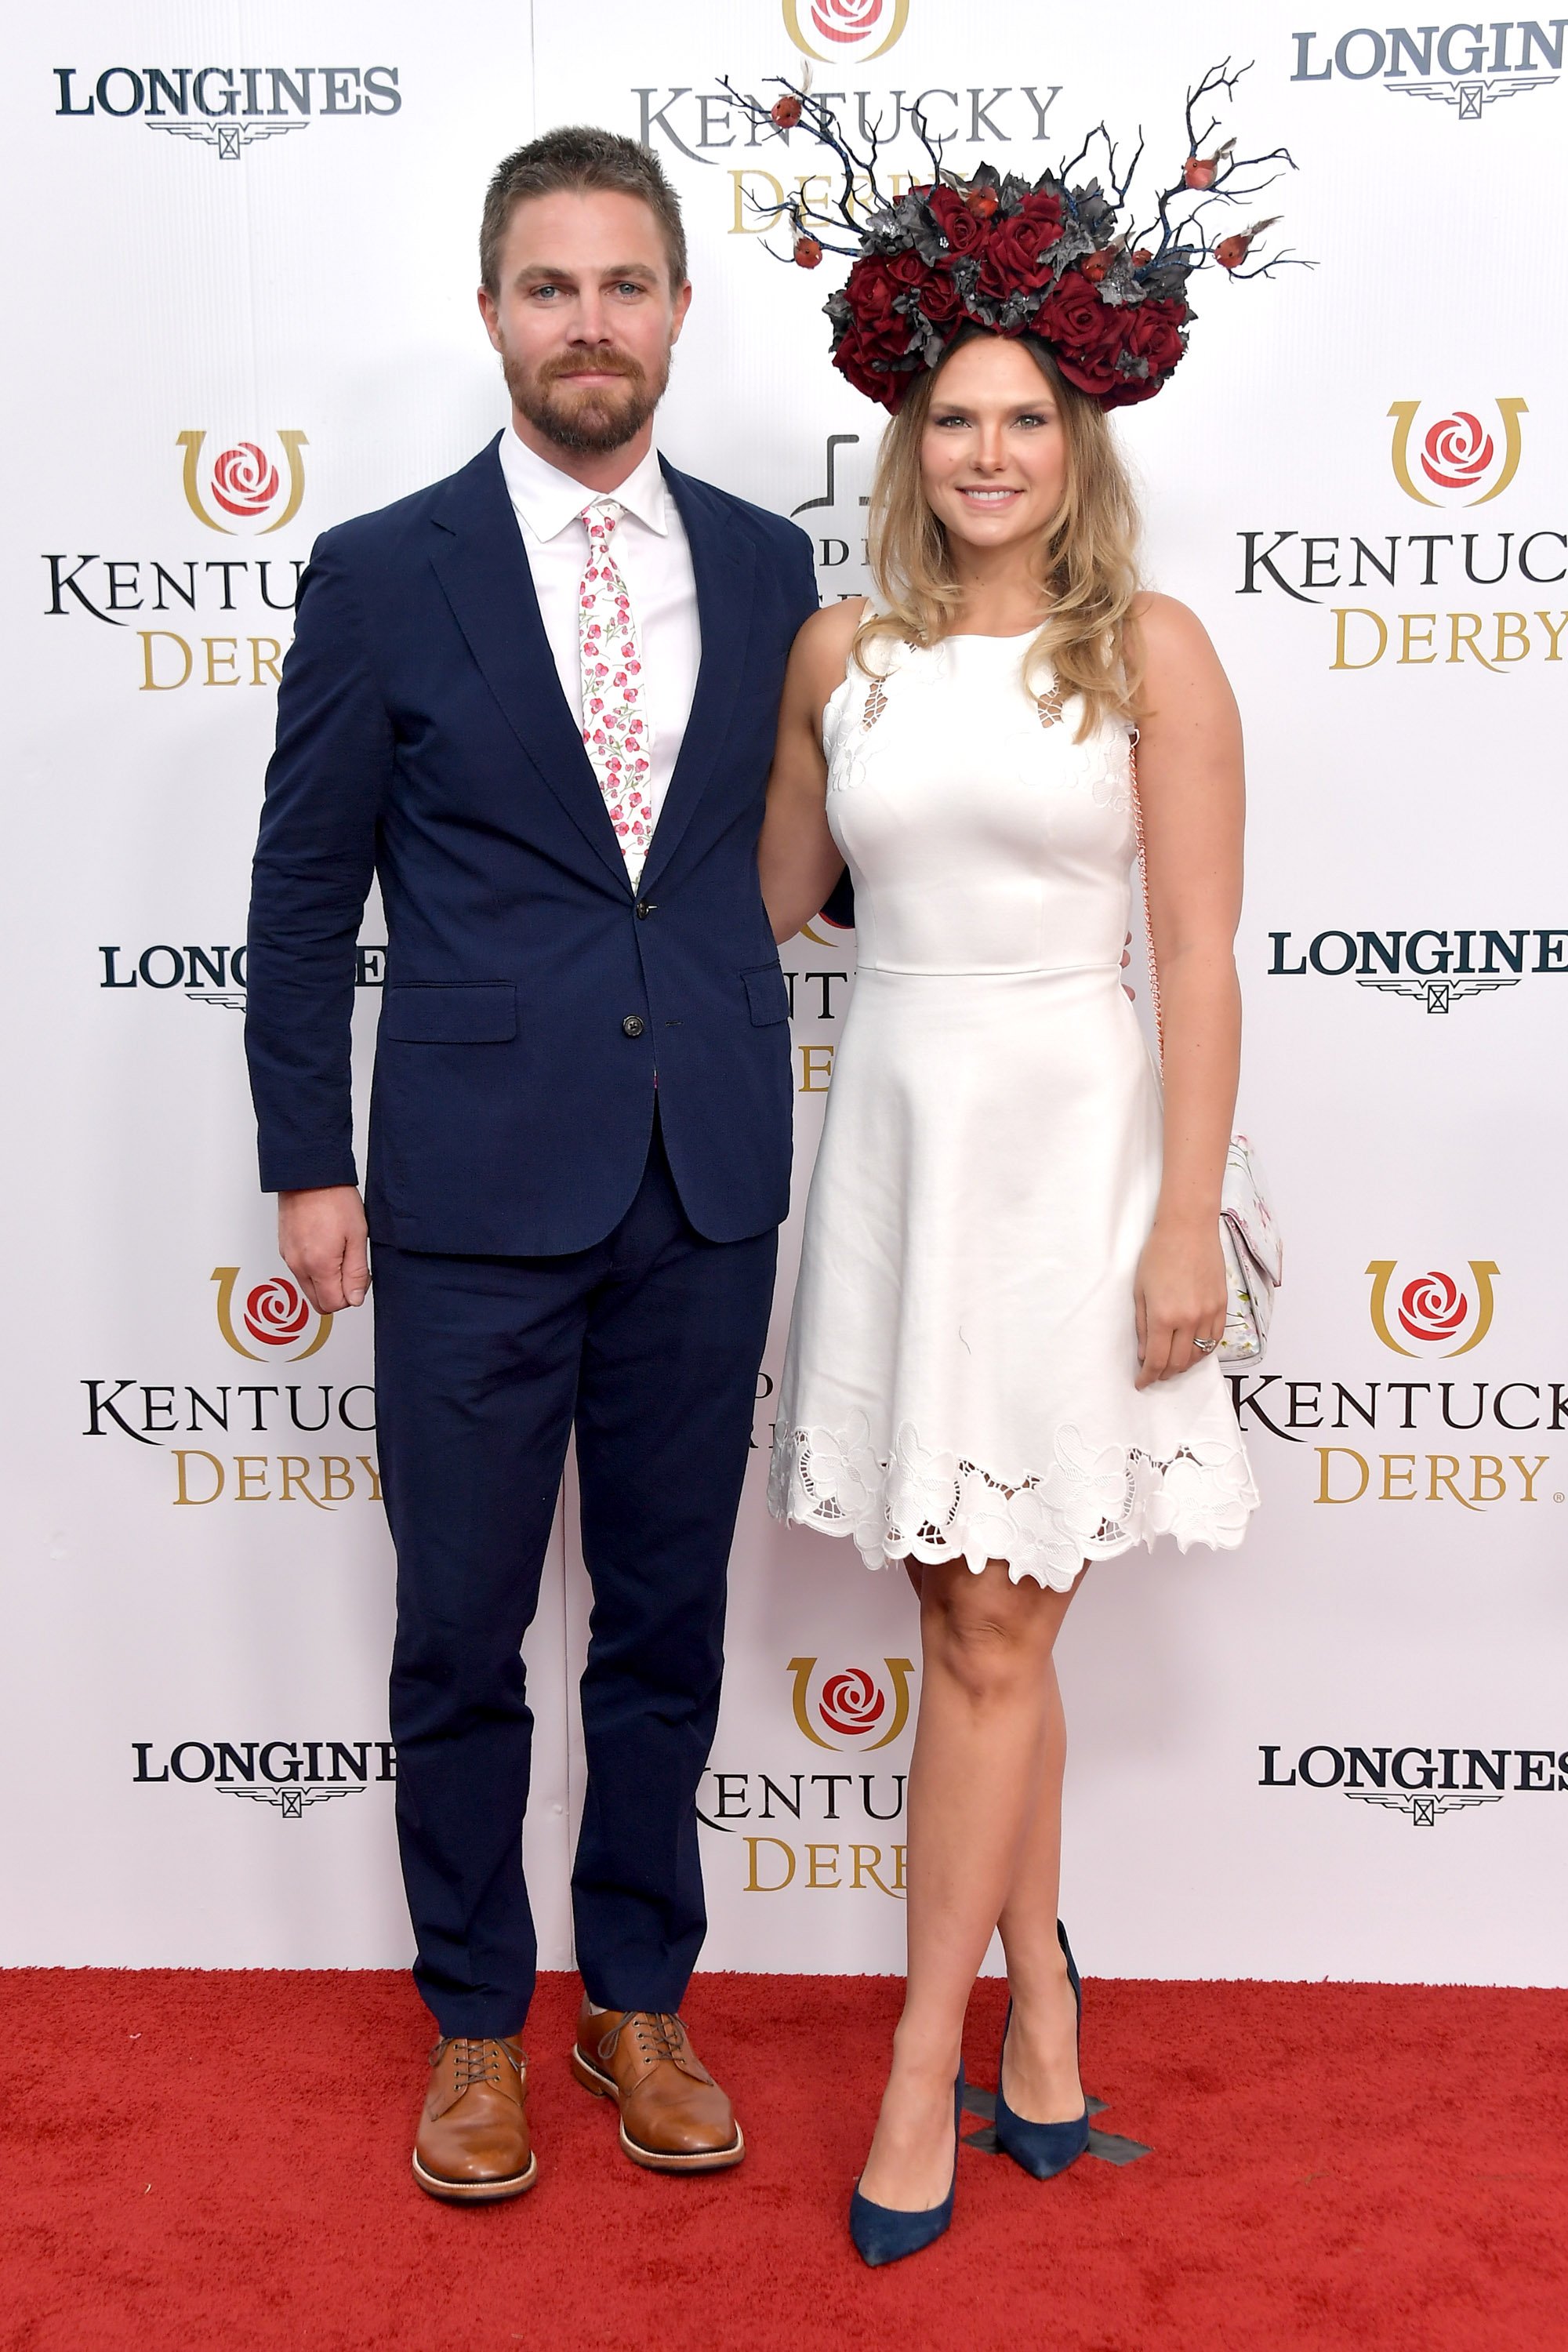  Stephen Amell and Cassandra Jean attend the 145th Kentucky Derby at Churchill Downs on May 04, 2019 in Louisville, Kentucky. | Source: Getty Images